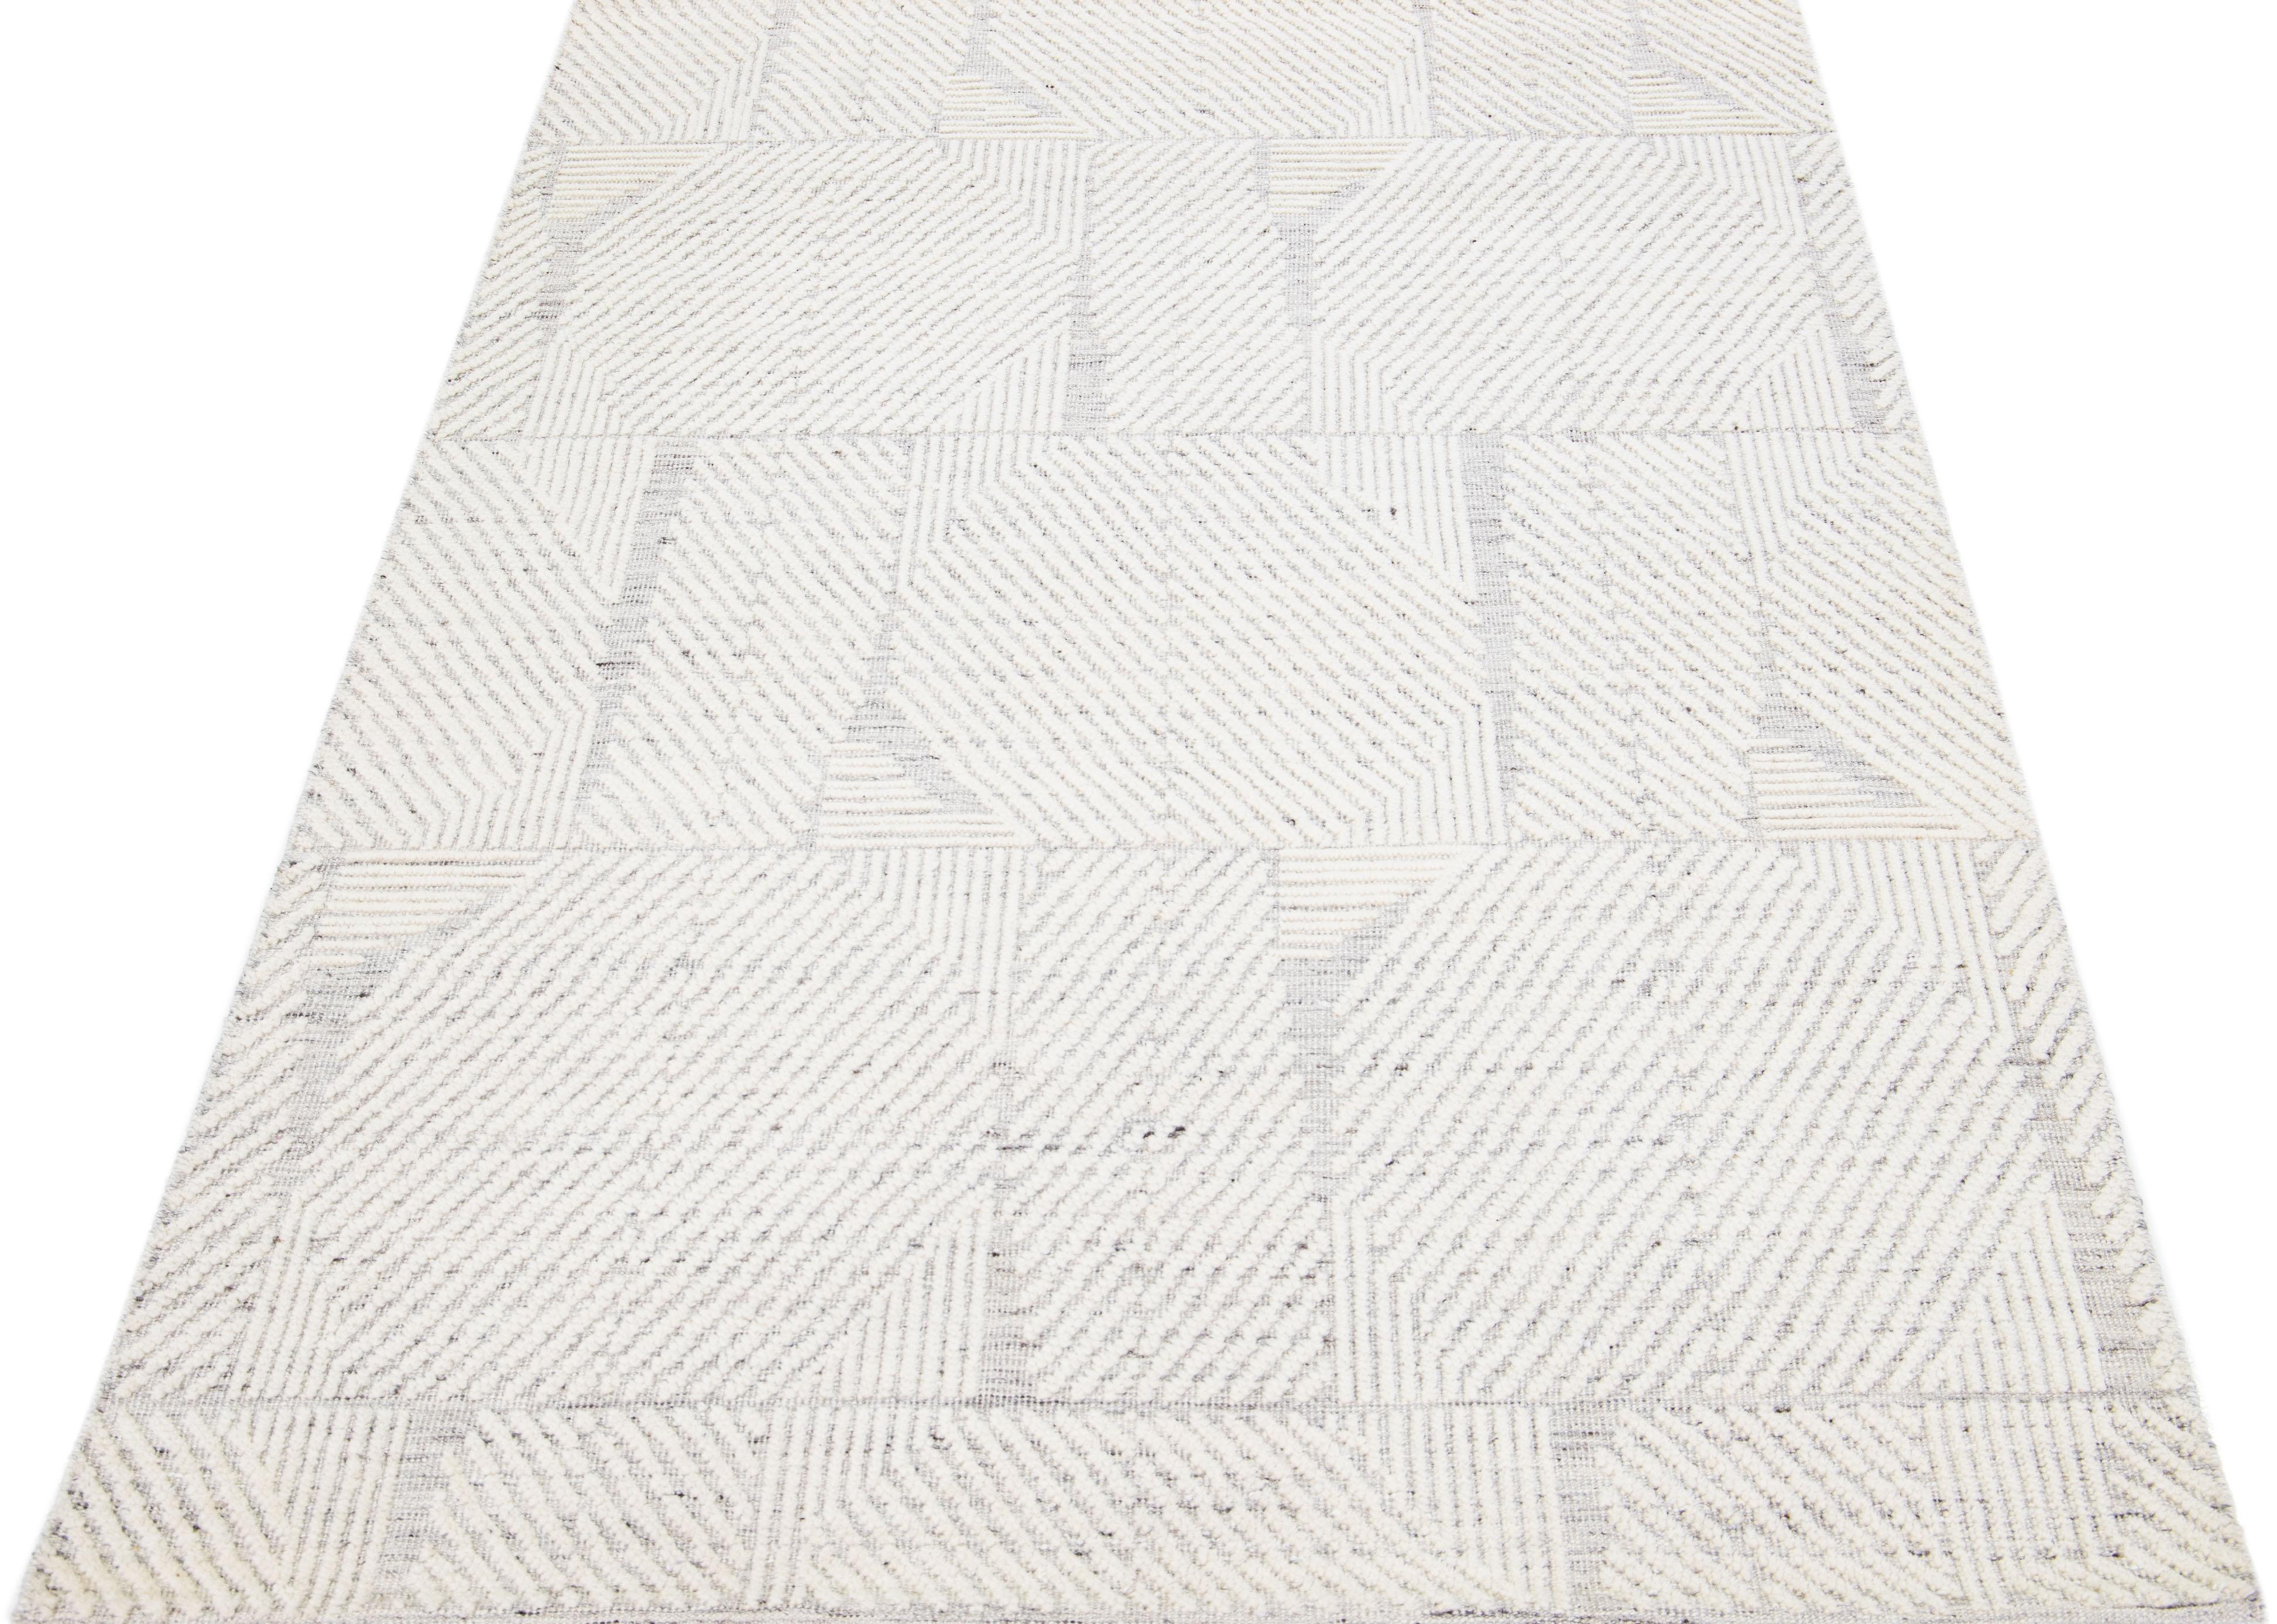 Beautiful modern Moroccan-style hand-knotted wool rug with a beige color field. This rug is part of our Apadana's Safi Collection and features a minimalist design in gray.

This rug measures: 5'1